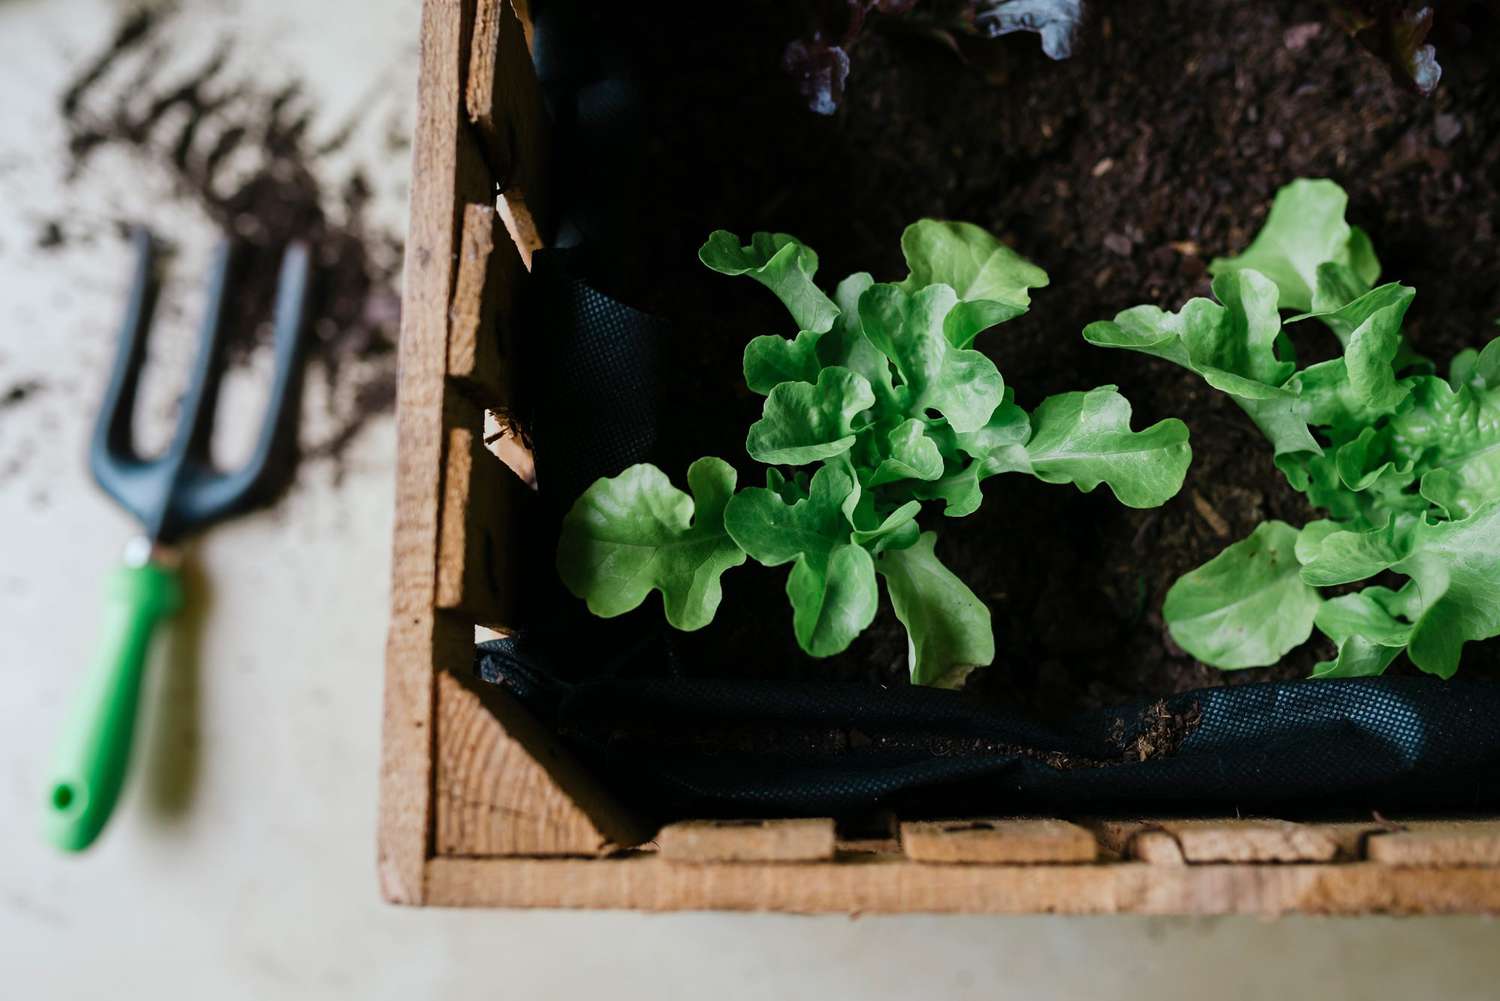 Planting lettuce in a wooden box